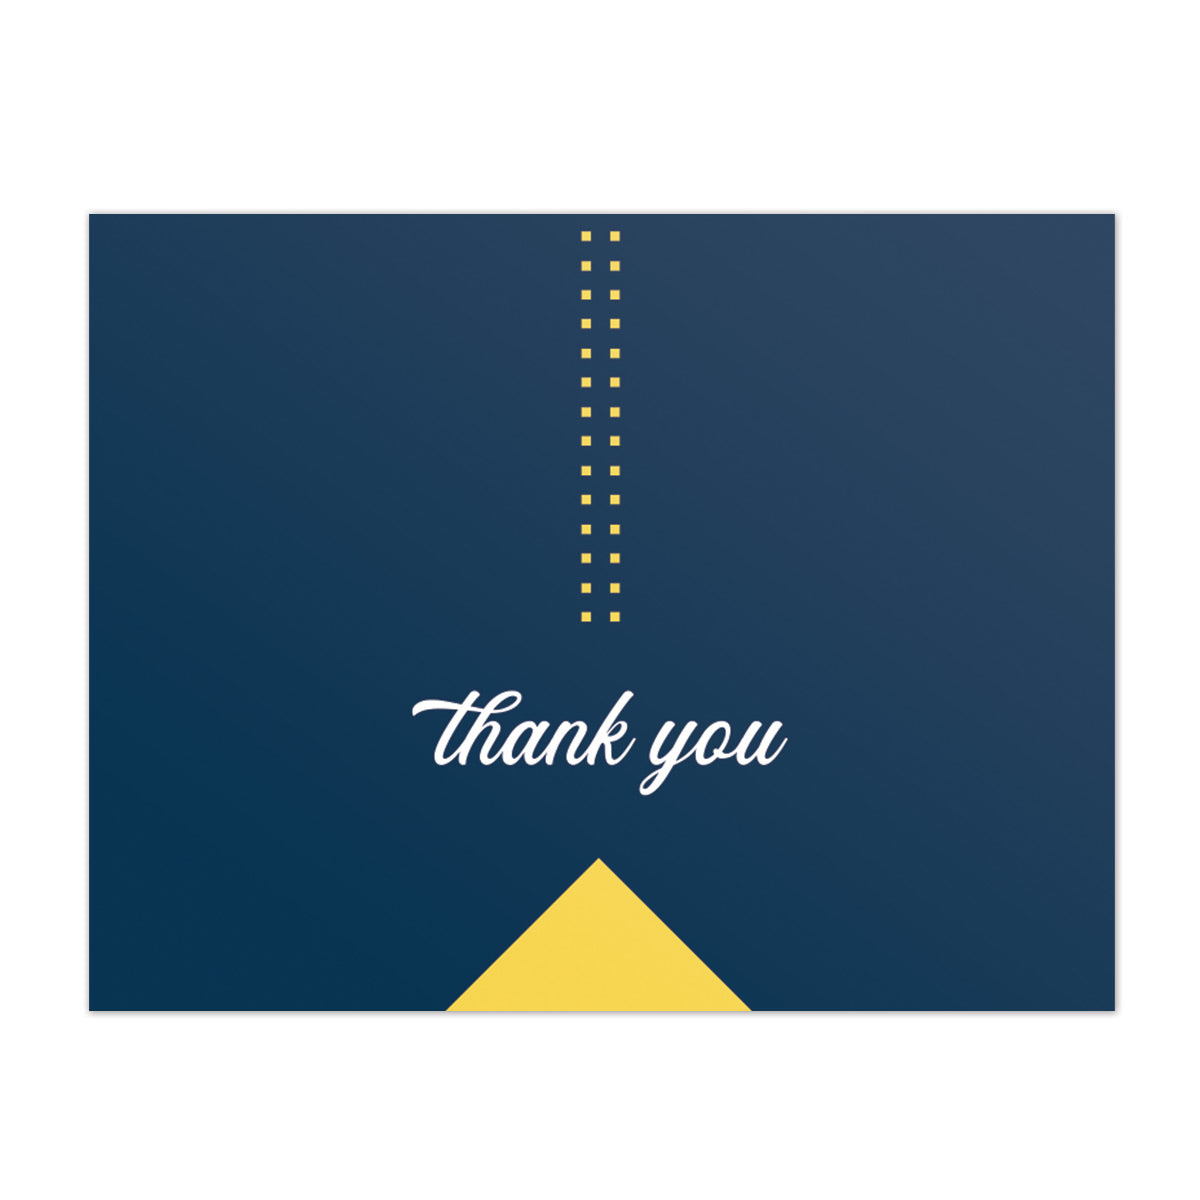 Minimalistic and geometric blue and yellow business thank you card design